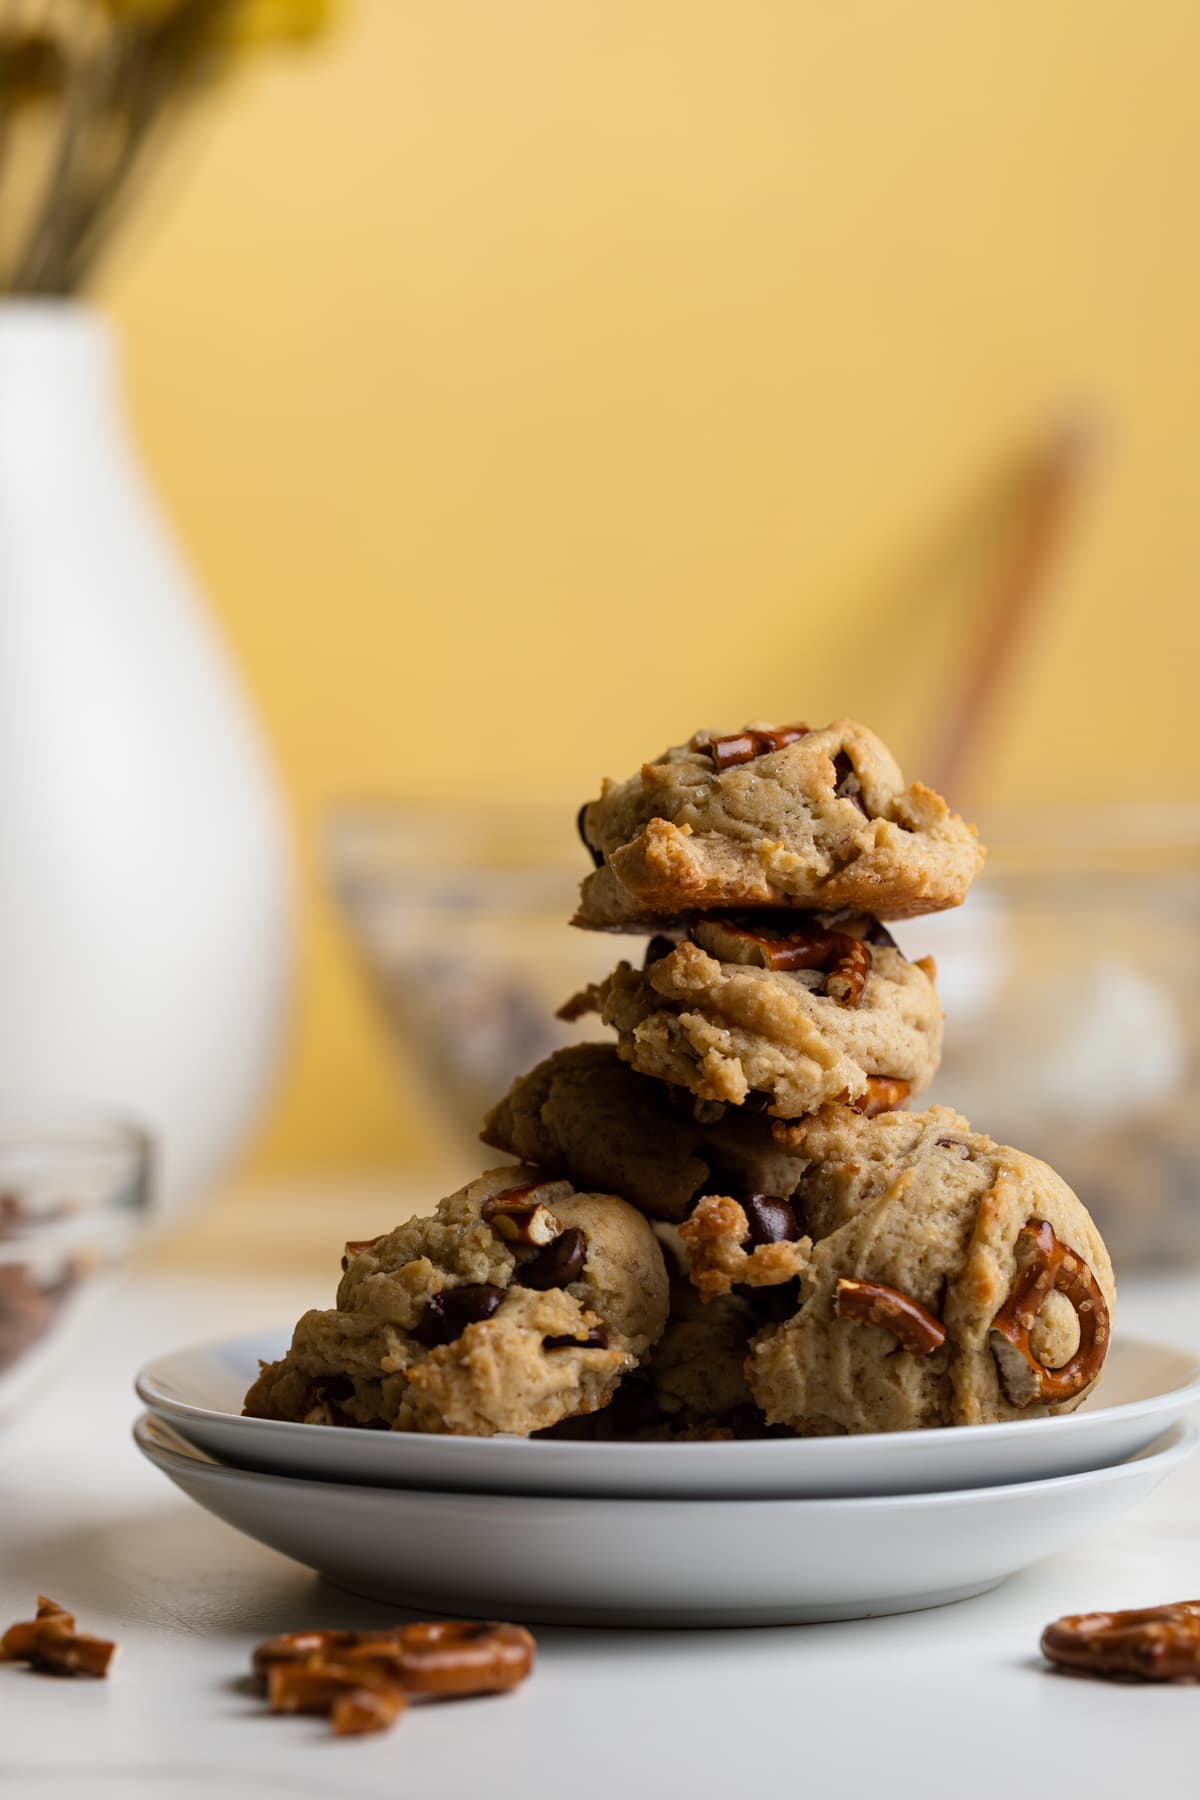 Chunky Vegan Chocolate Chip and Pretzel Cookies piled high on small plates.